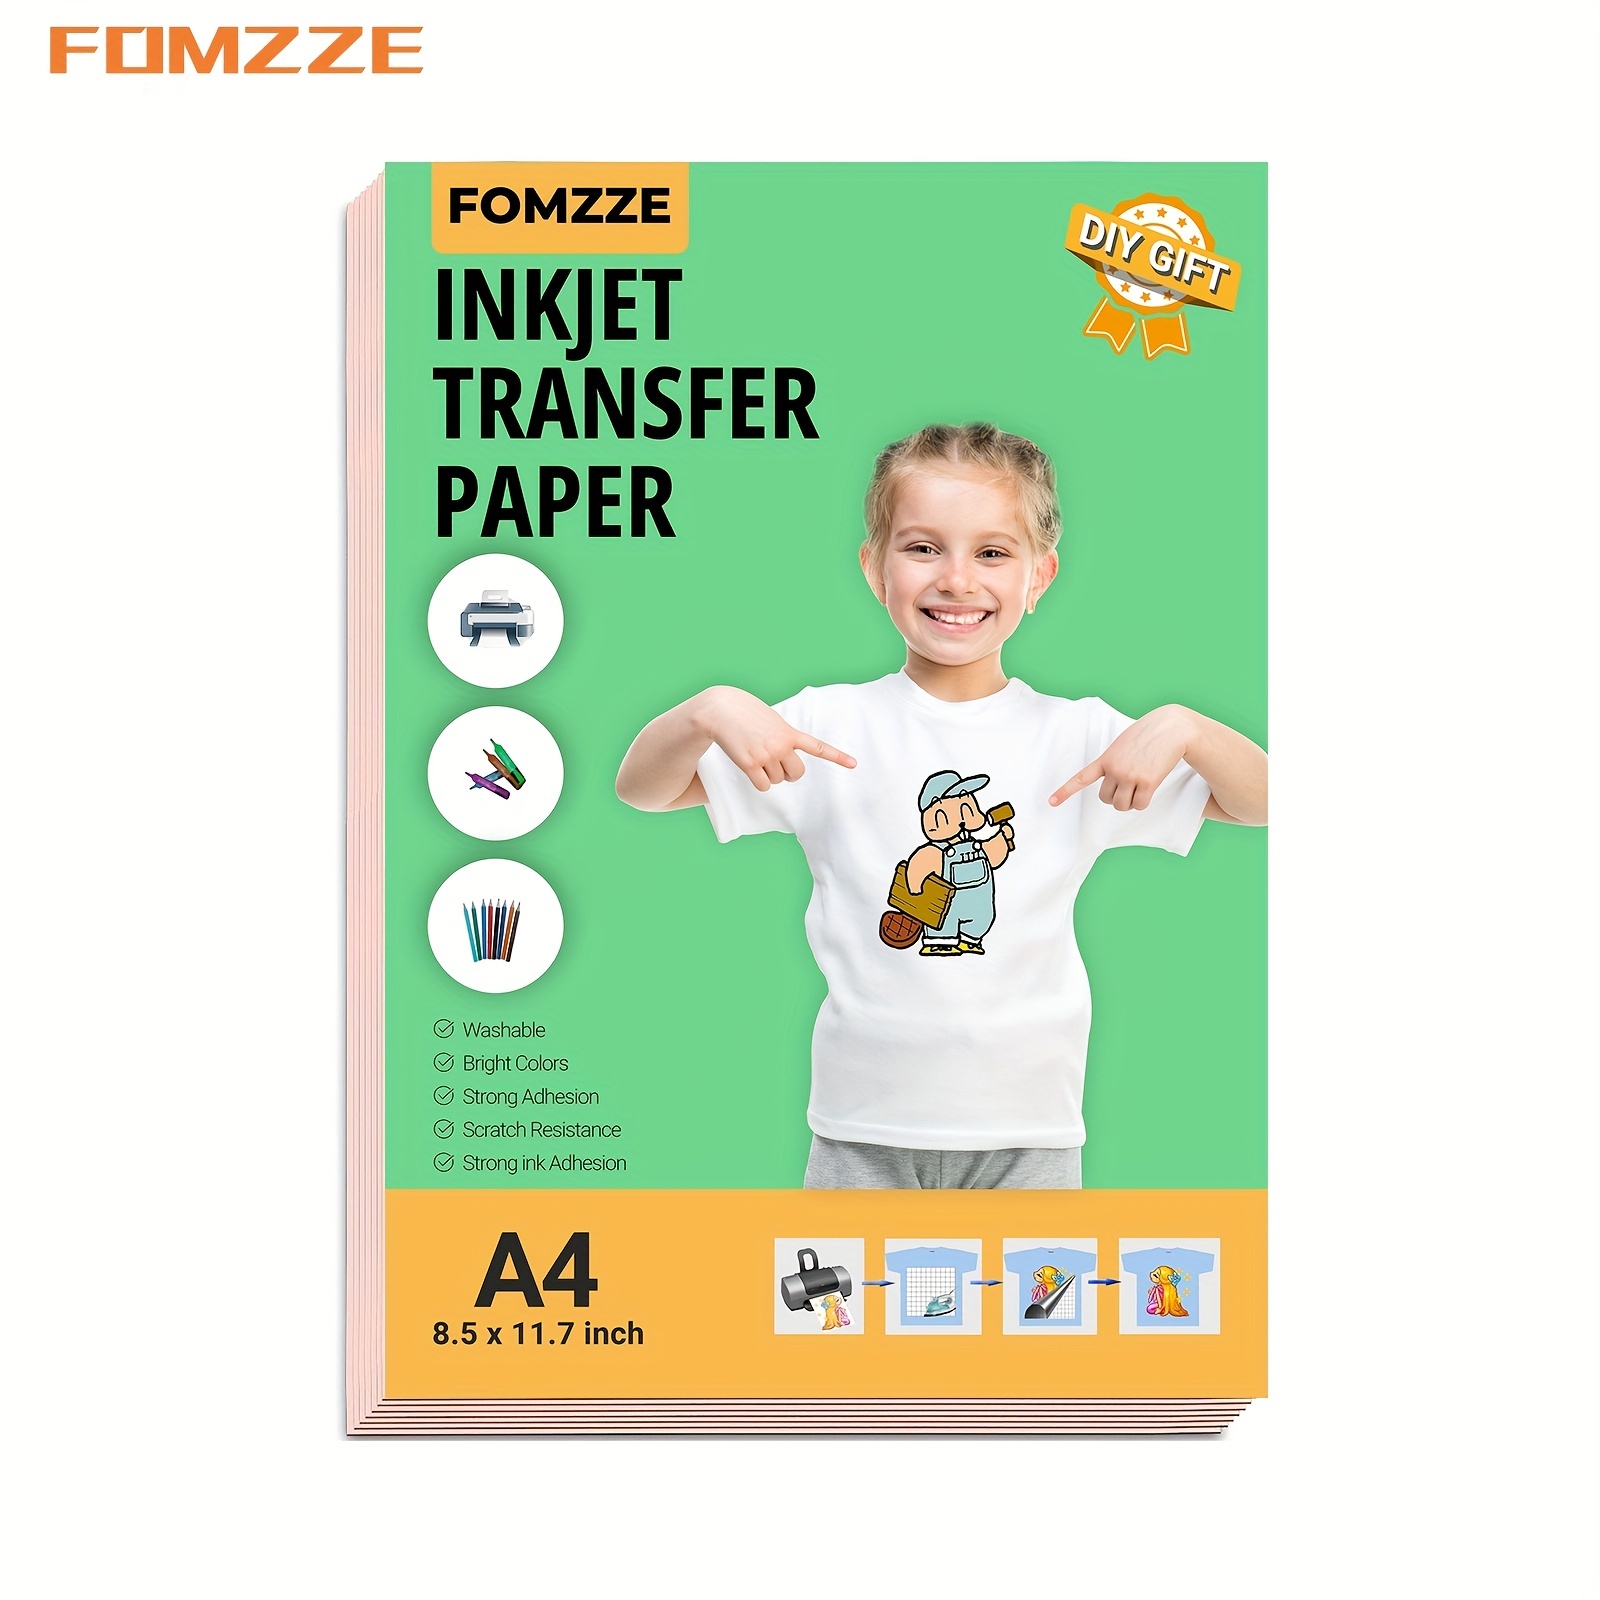 5 x A4 IRON ON T-SHIRT TRANSFER PAPER FOR DARK FABRIC - FOR INKJET